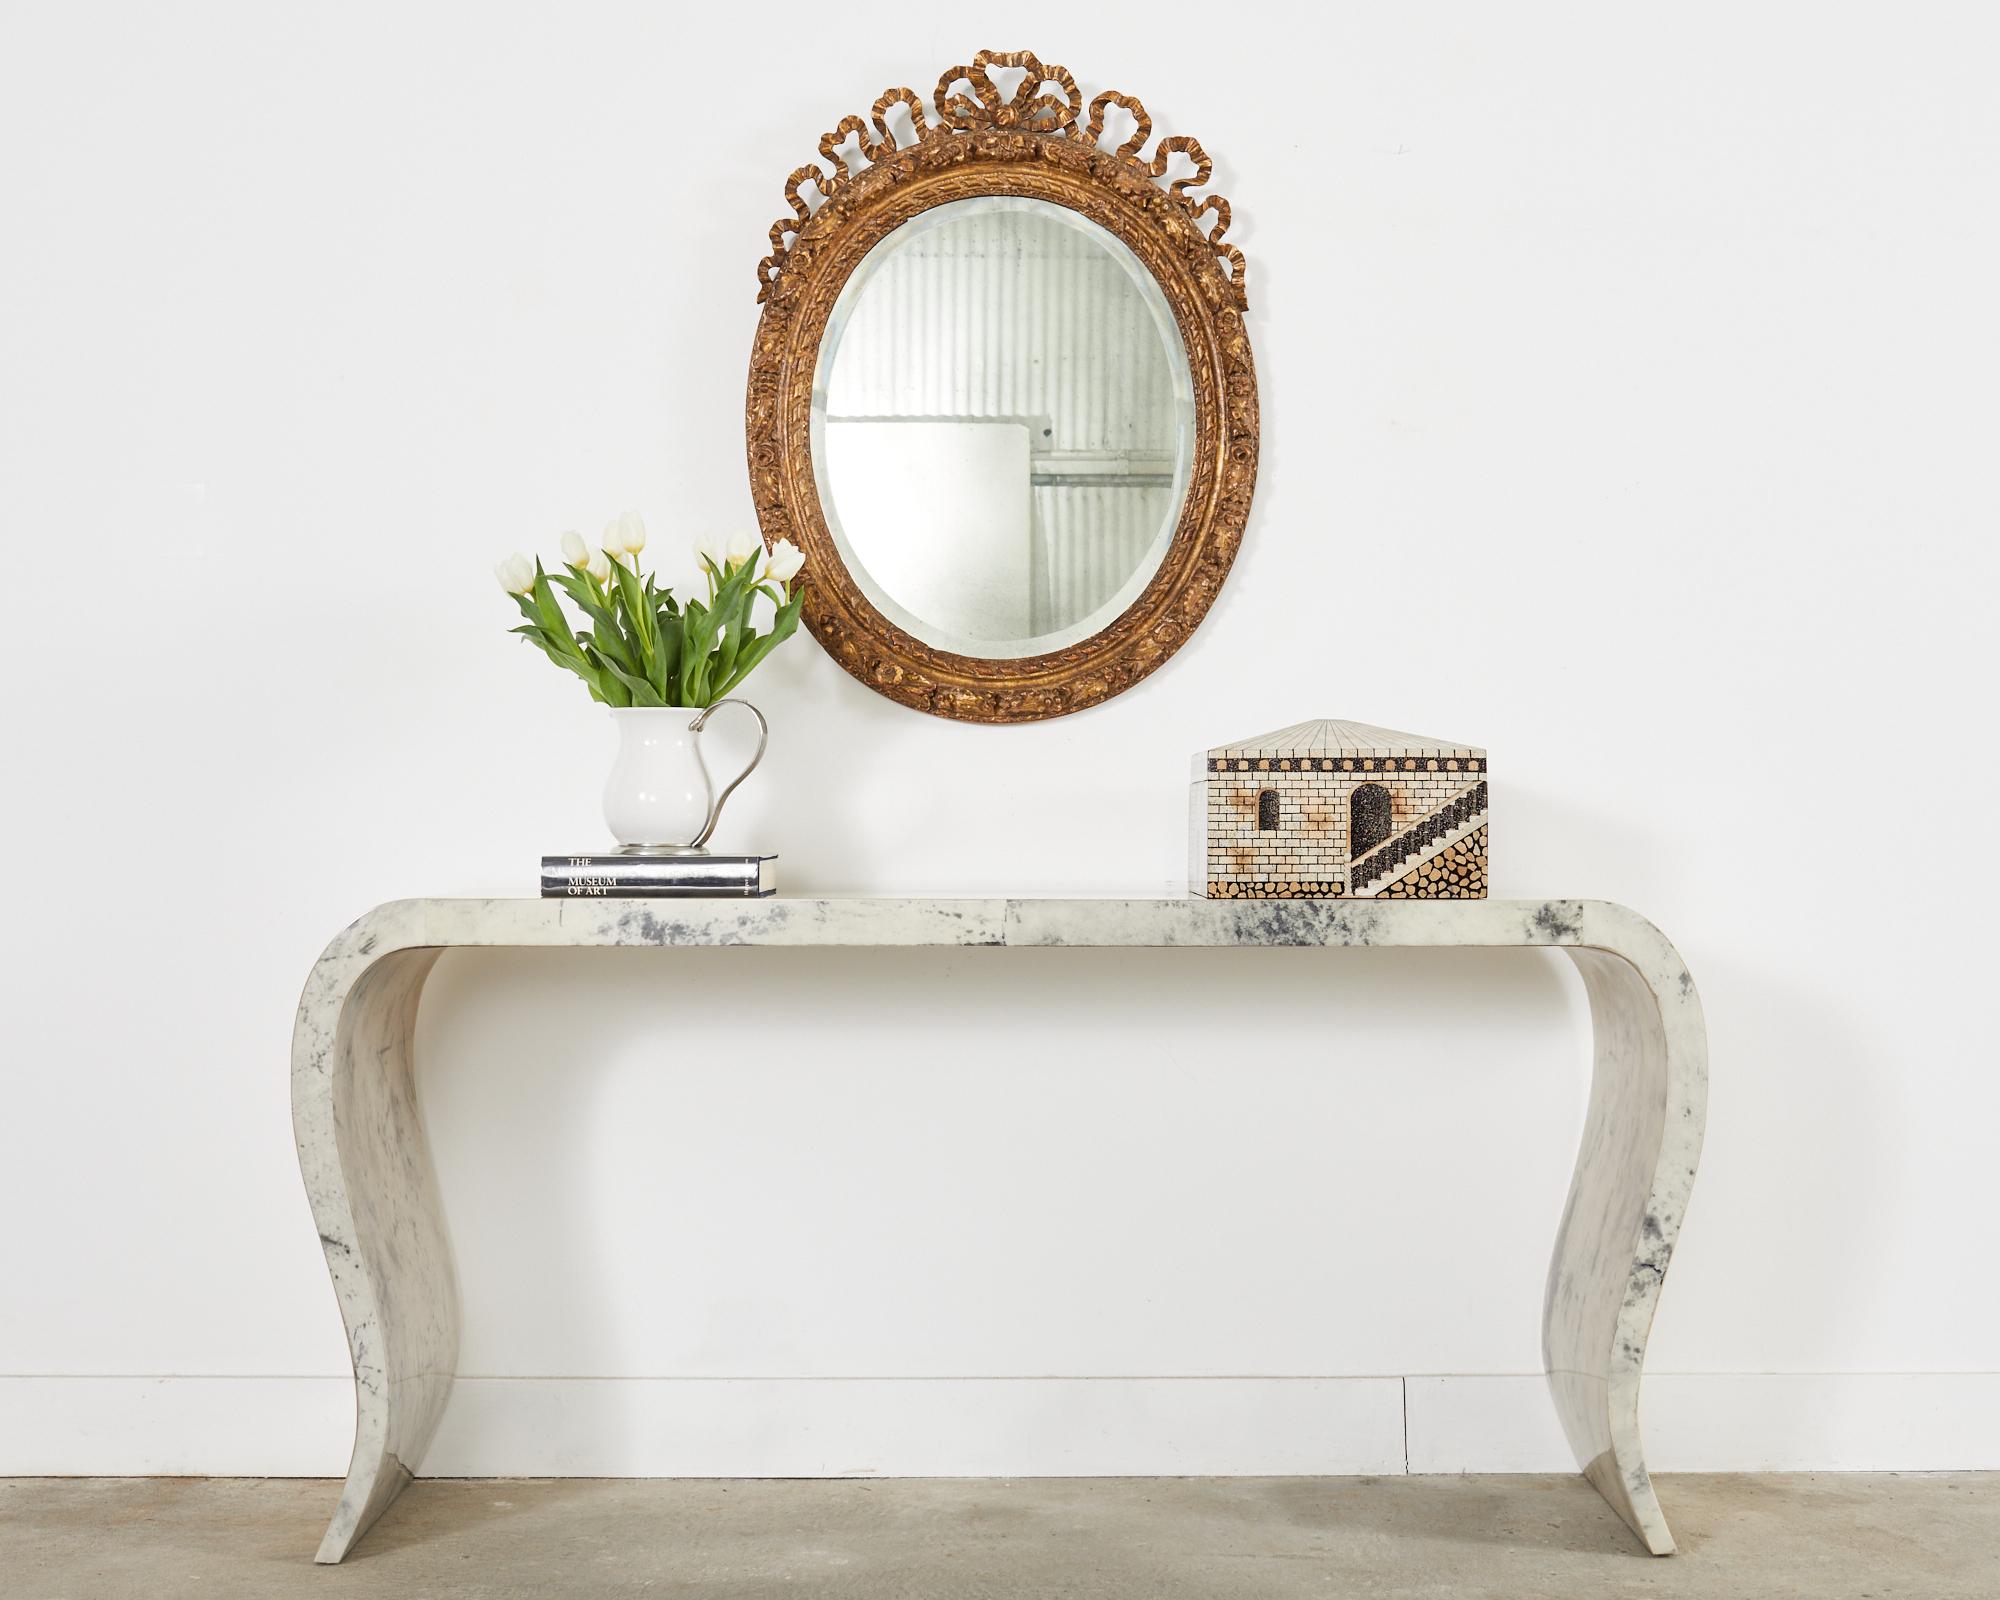 Dramatic goatskin parchment console table crafted by Scala Luxury in the modern style. The gracefully curved legs give the table an hourglass shape with a remarkable light parchment or vellum veneer that has a Carrara marble look with grey veins.